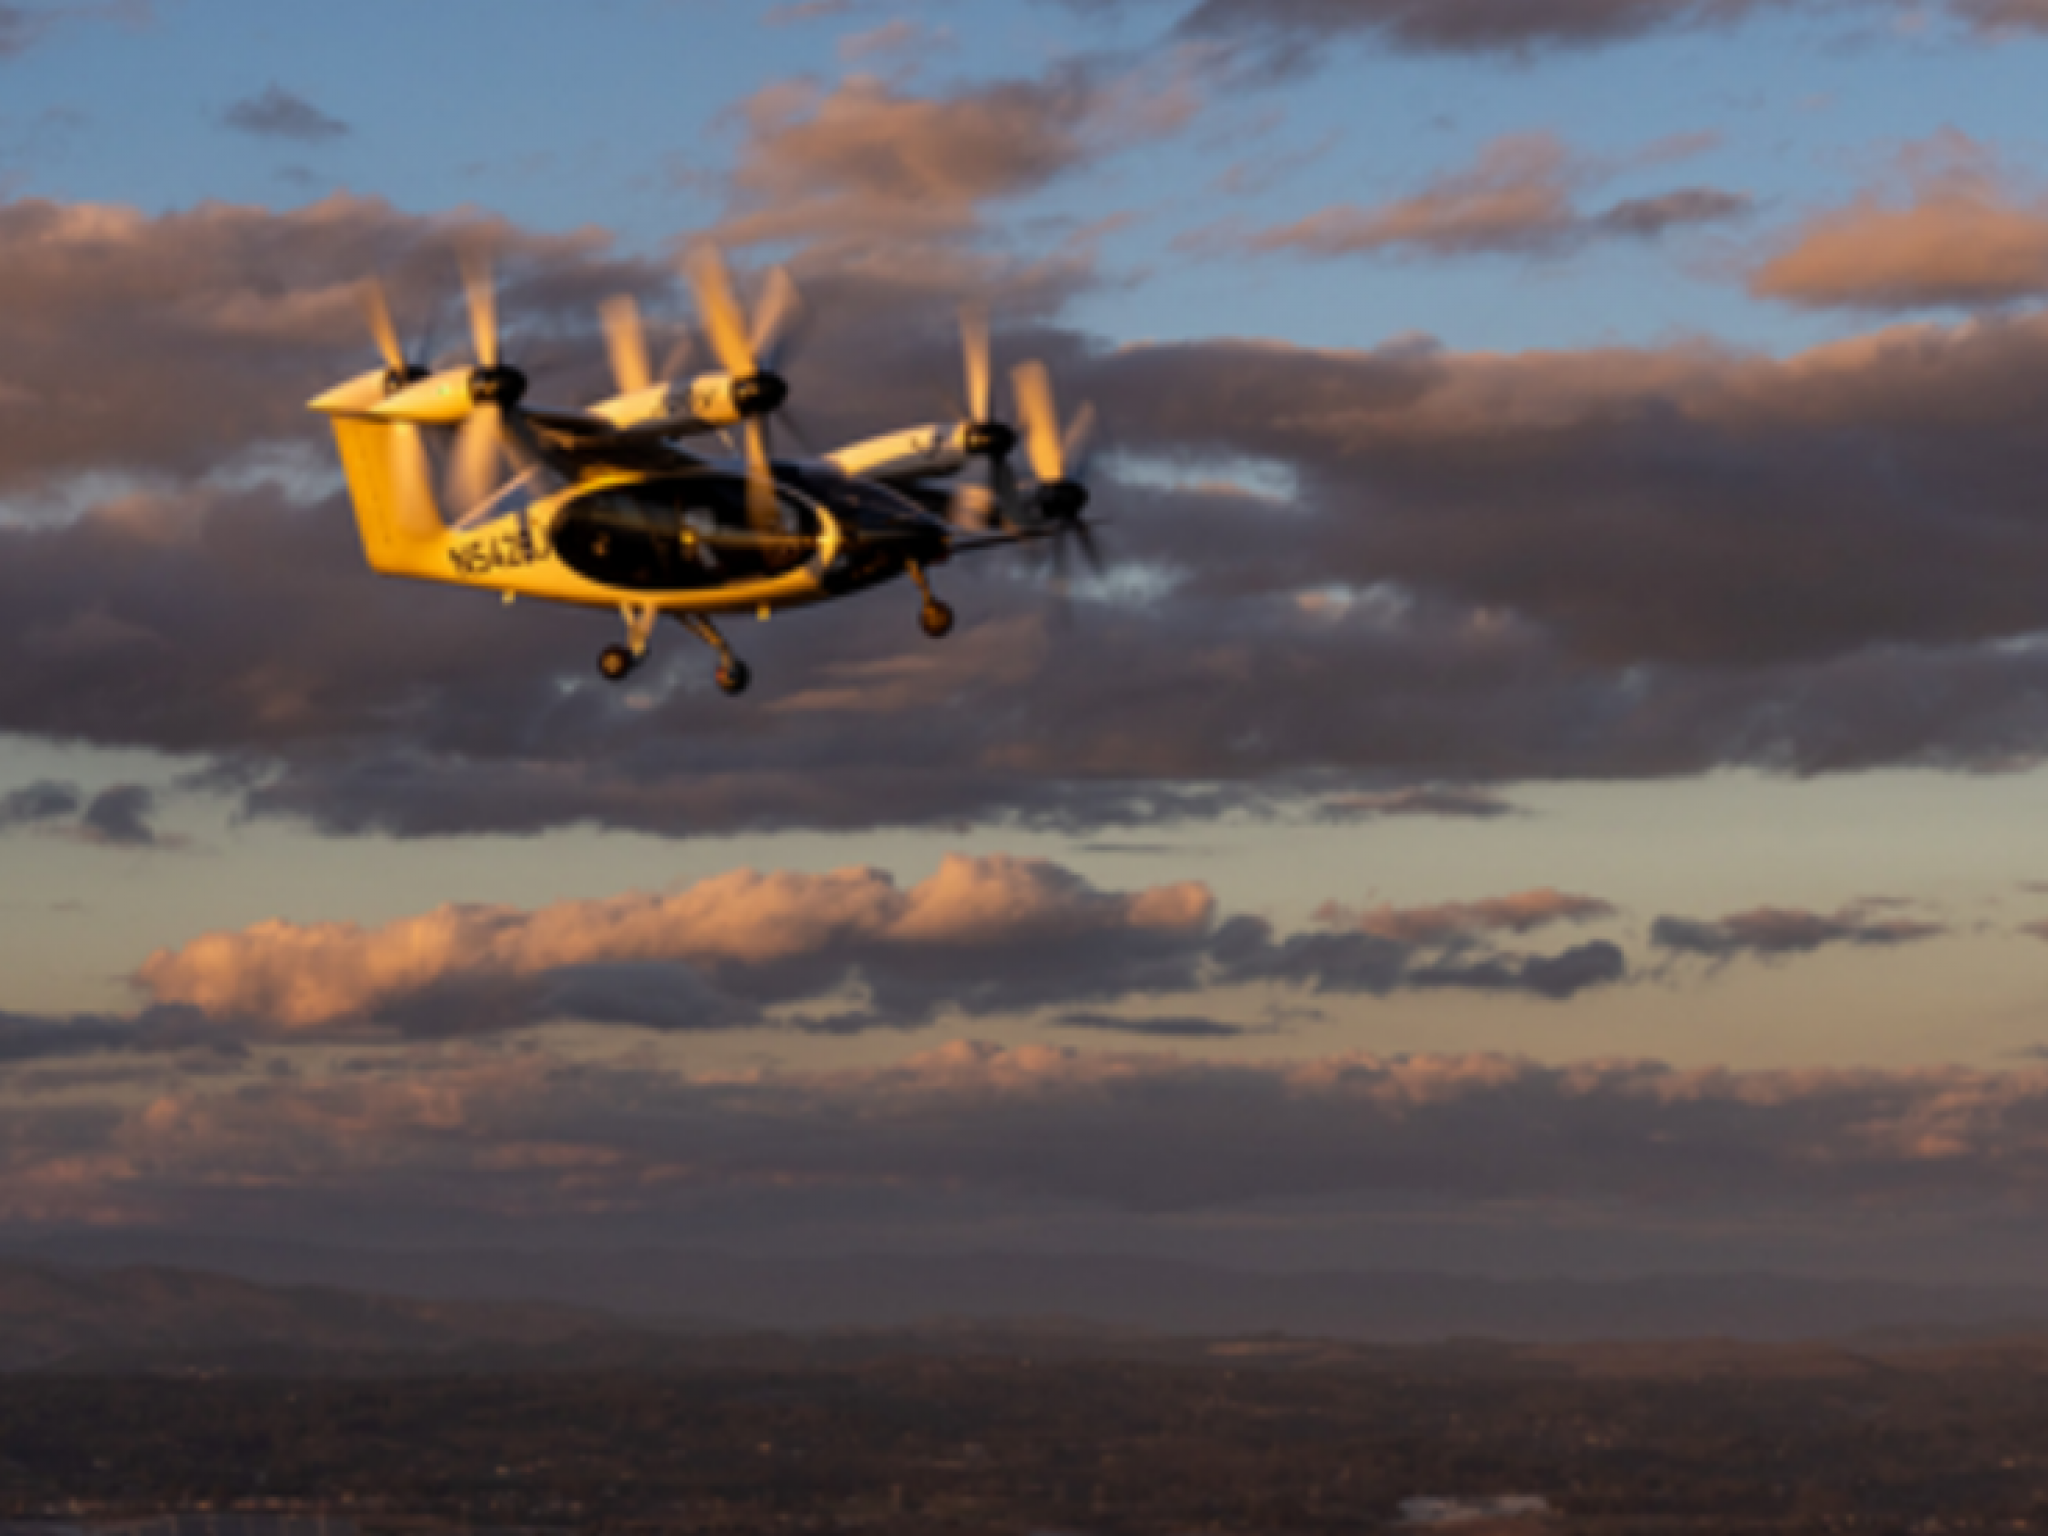  joby-aviation-opens-slightly-lower-after-faa-gives-nod-to-air-taxi-software 